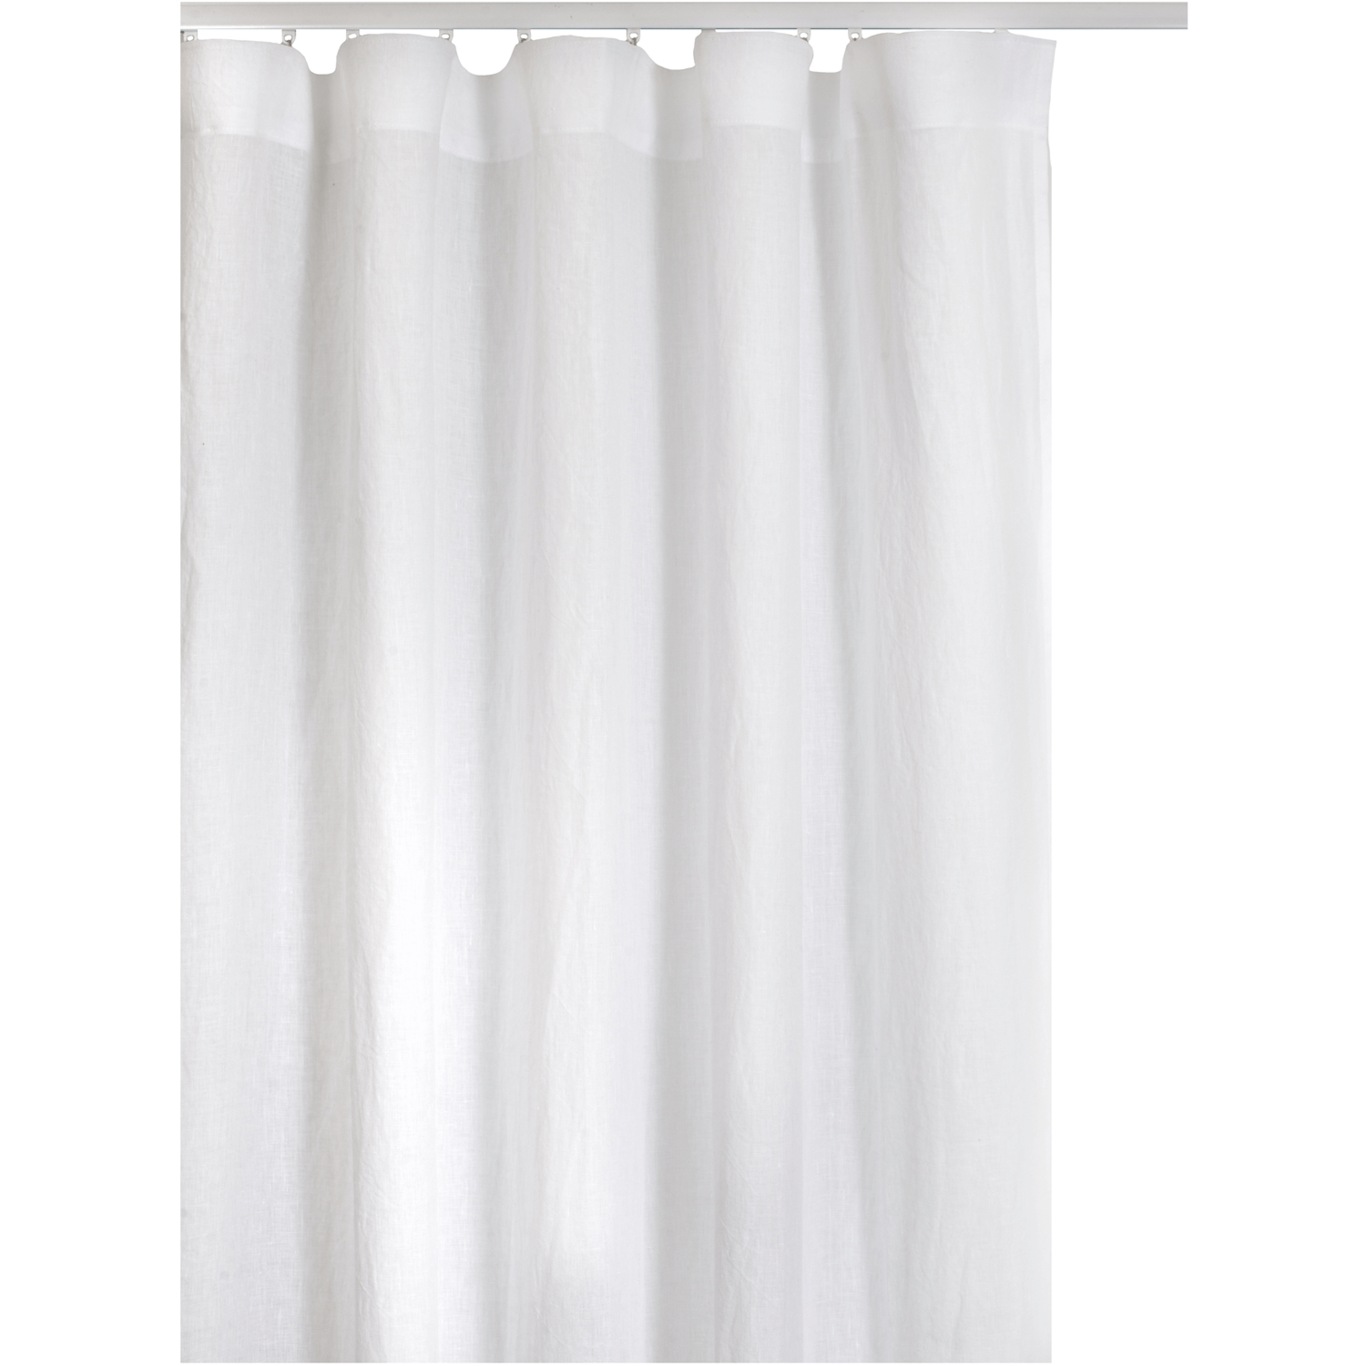 Twilight Curtain With Gathering Tape 250x280 cm, White